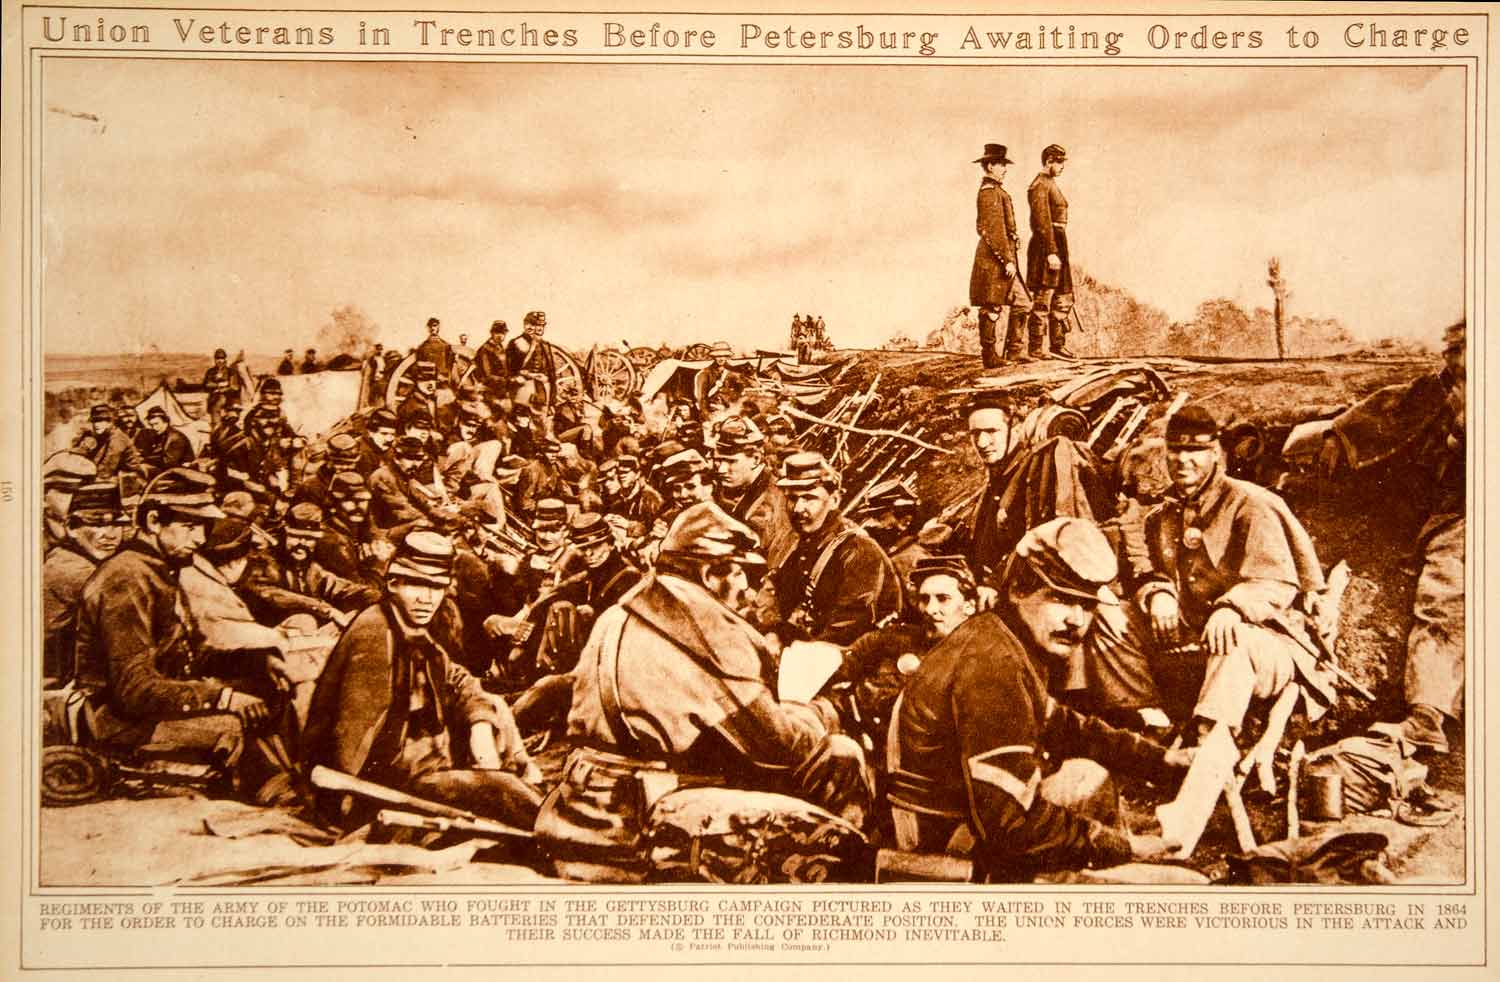 1923 Rotogravure Civil War Union Soldiers Army of the Potomac Siege Petersburg